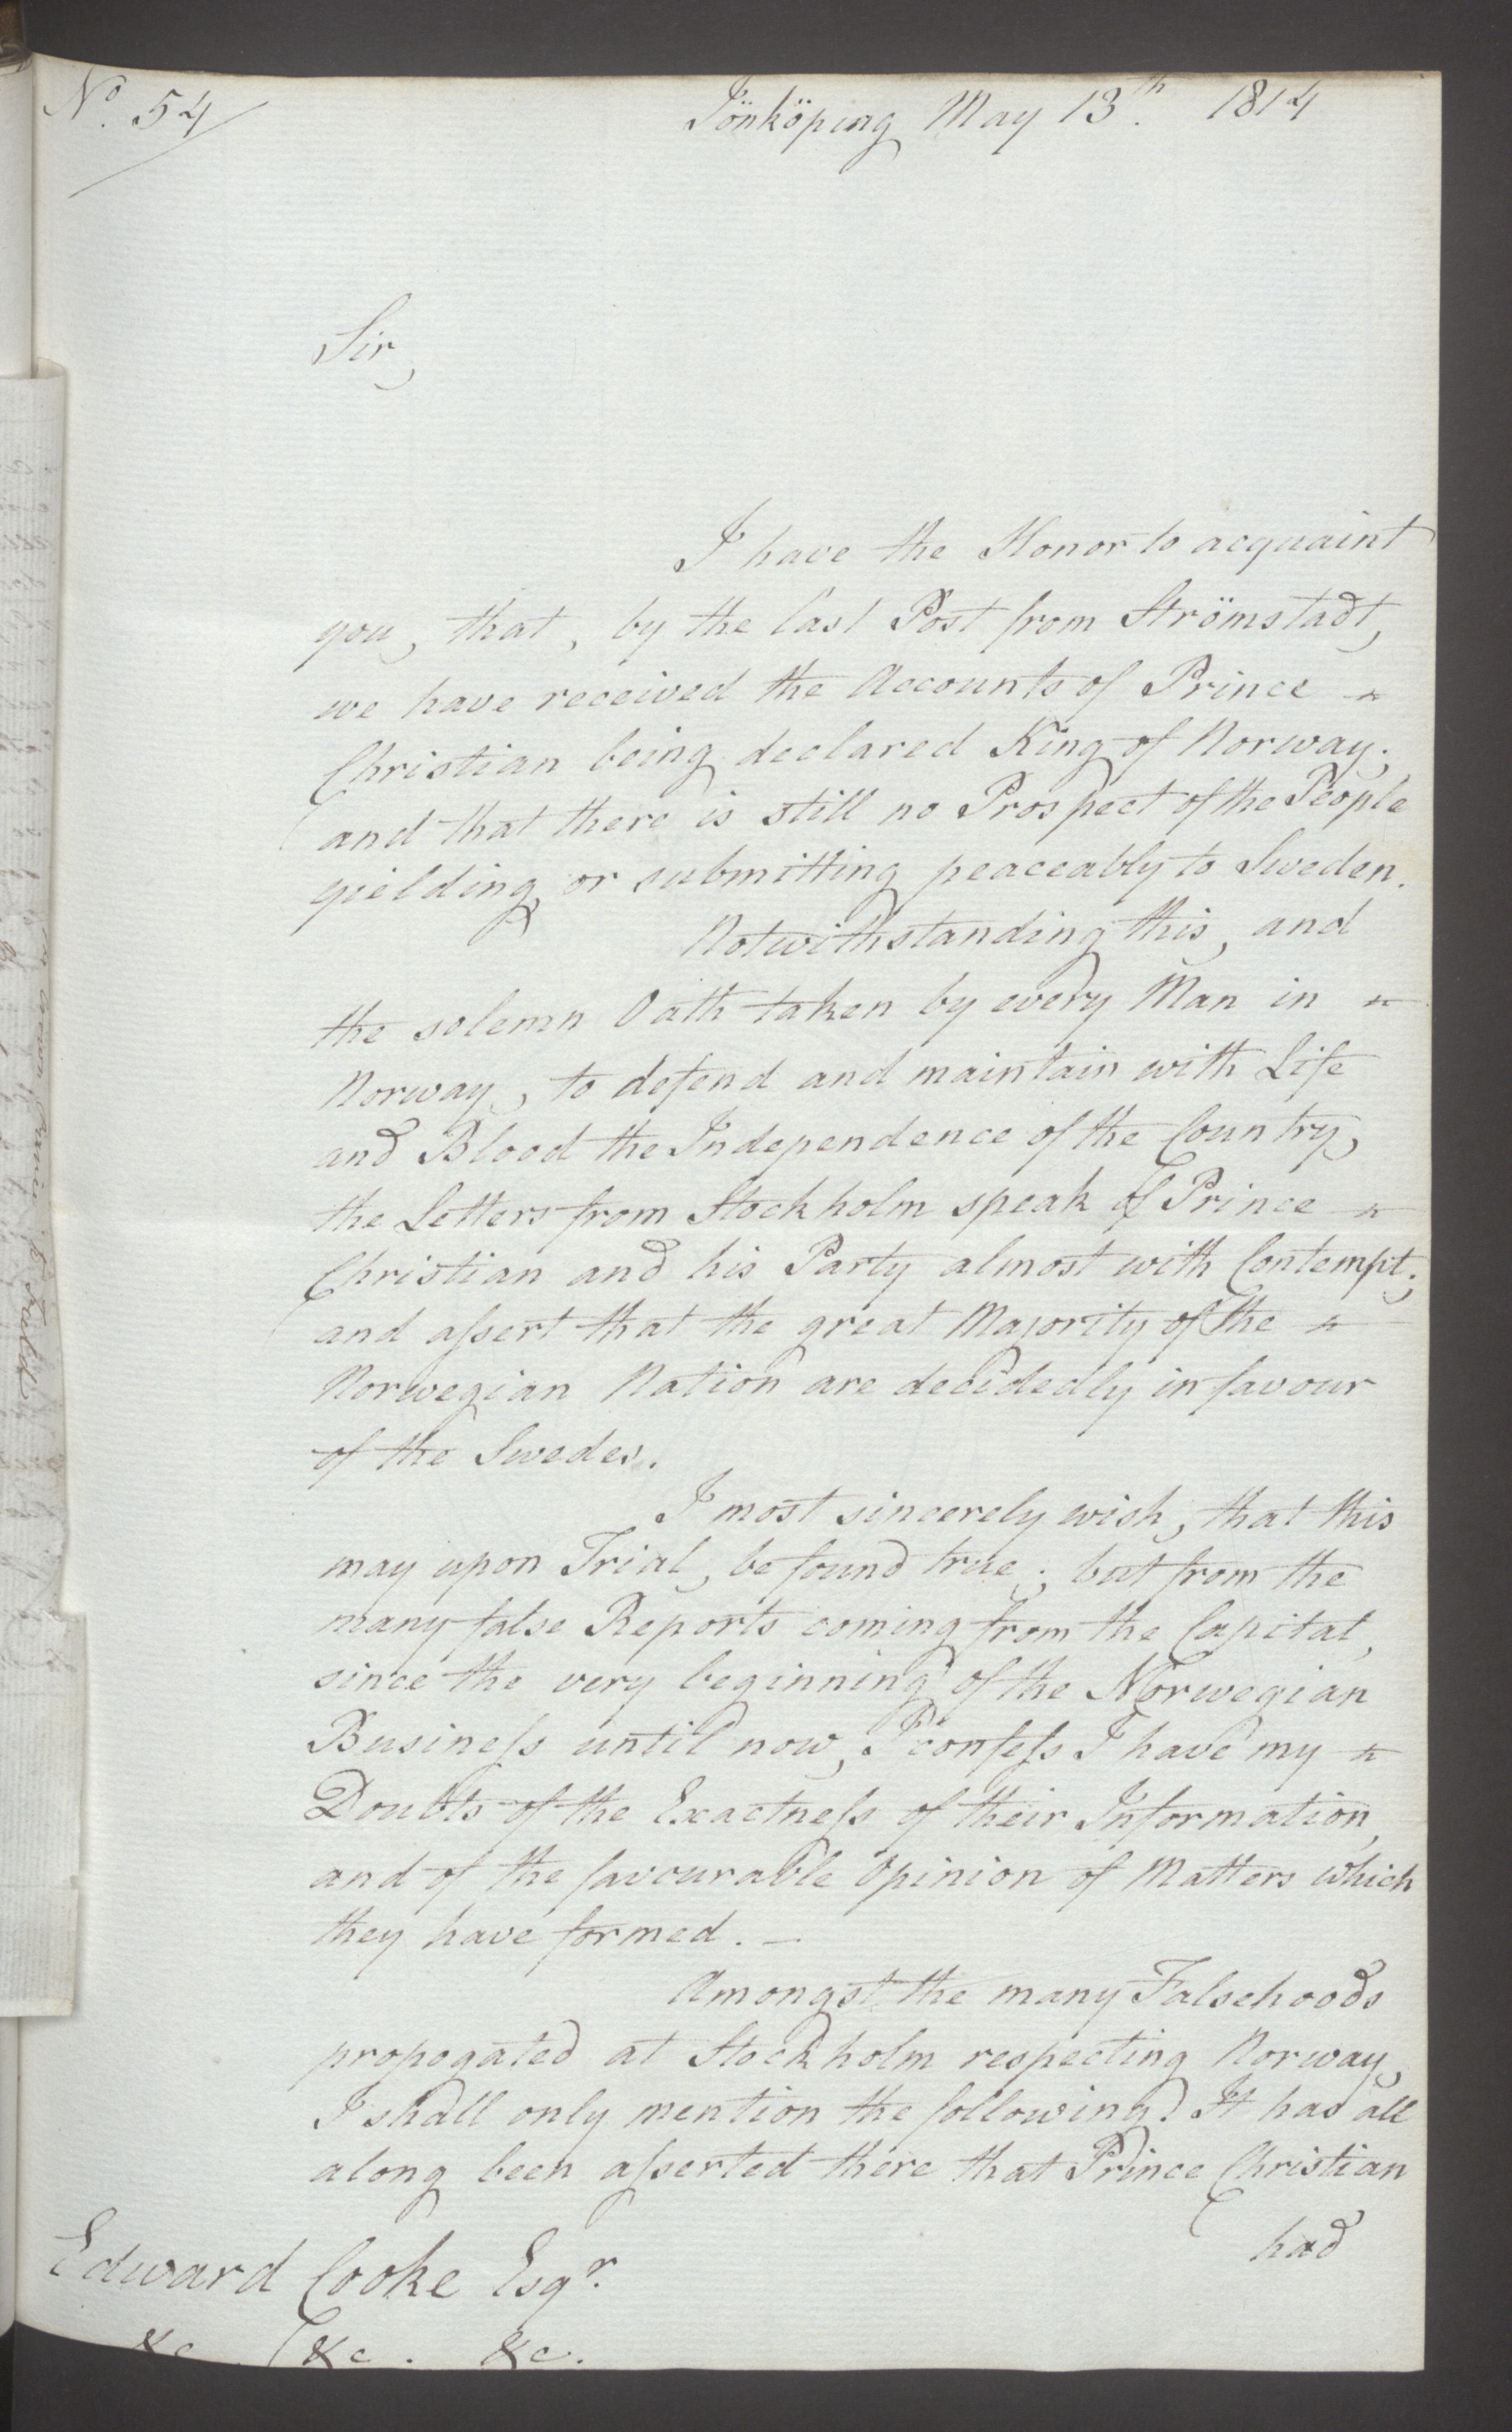 Foreign Office*, UKA/-/FO 38/16: Sir C. Gordon. Reports from Malmö, Jonkoping, and Helsingborg, 1814, s. 45